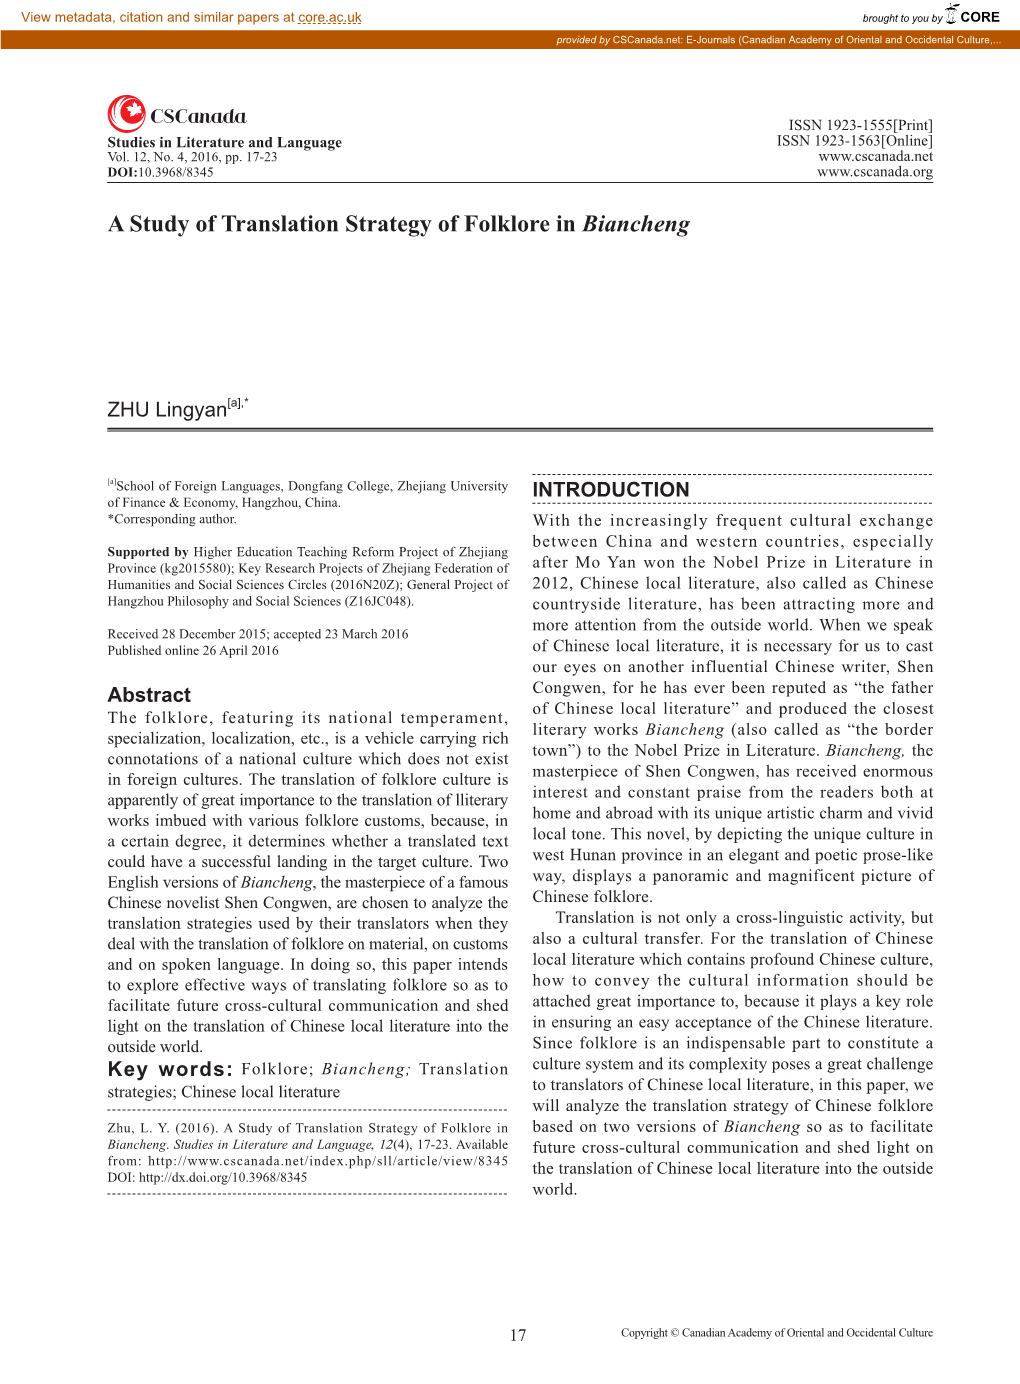 A Study of Translation Strategy of Folklore in Biancheng